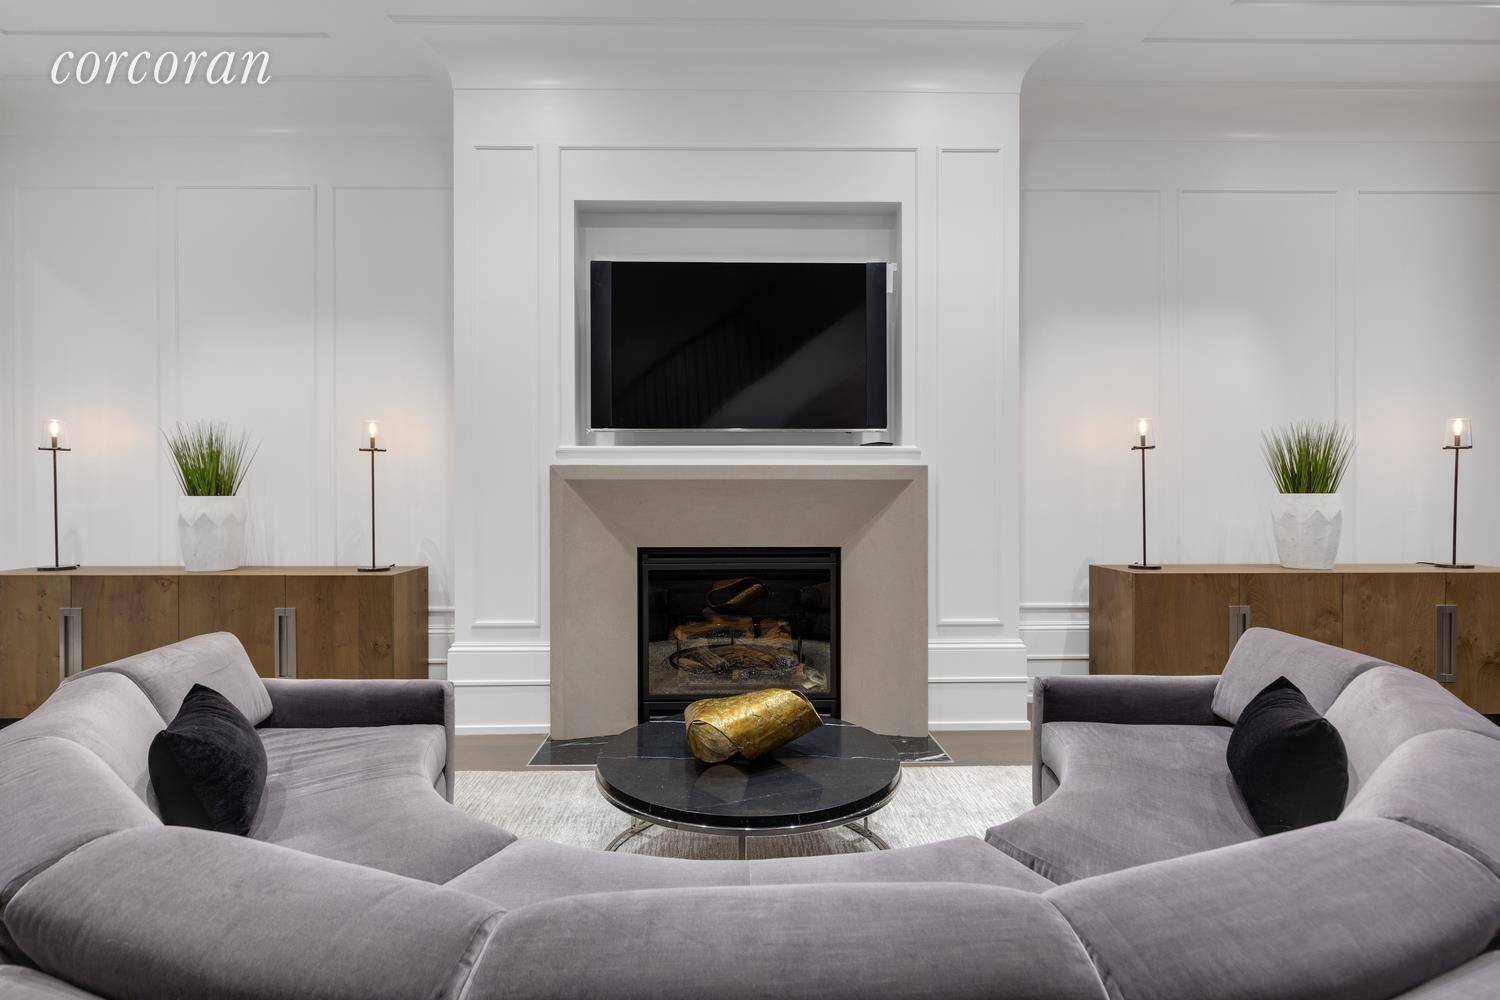 Handsome and refined, this impeccably renovated 20 foot wide brownstone with stoop and elevator has been gutted to its shell then rebuilt and meticulously crafted to create a modern classic ...